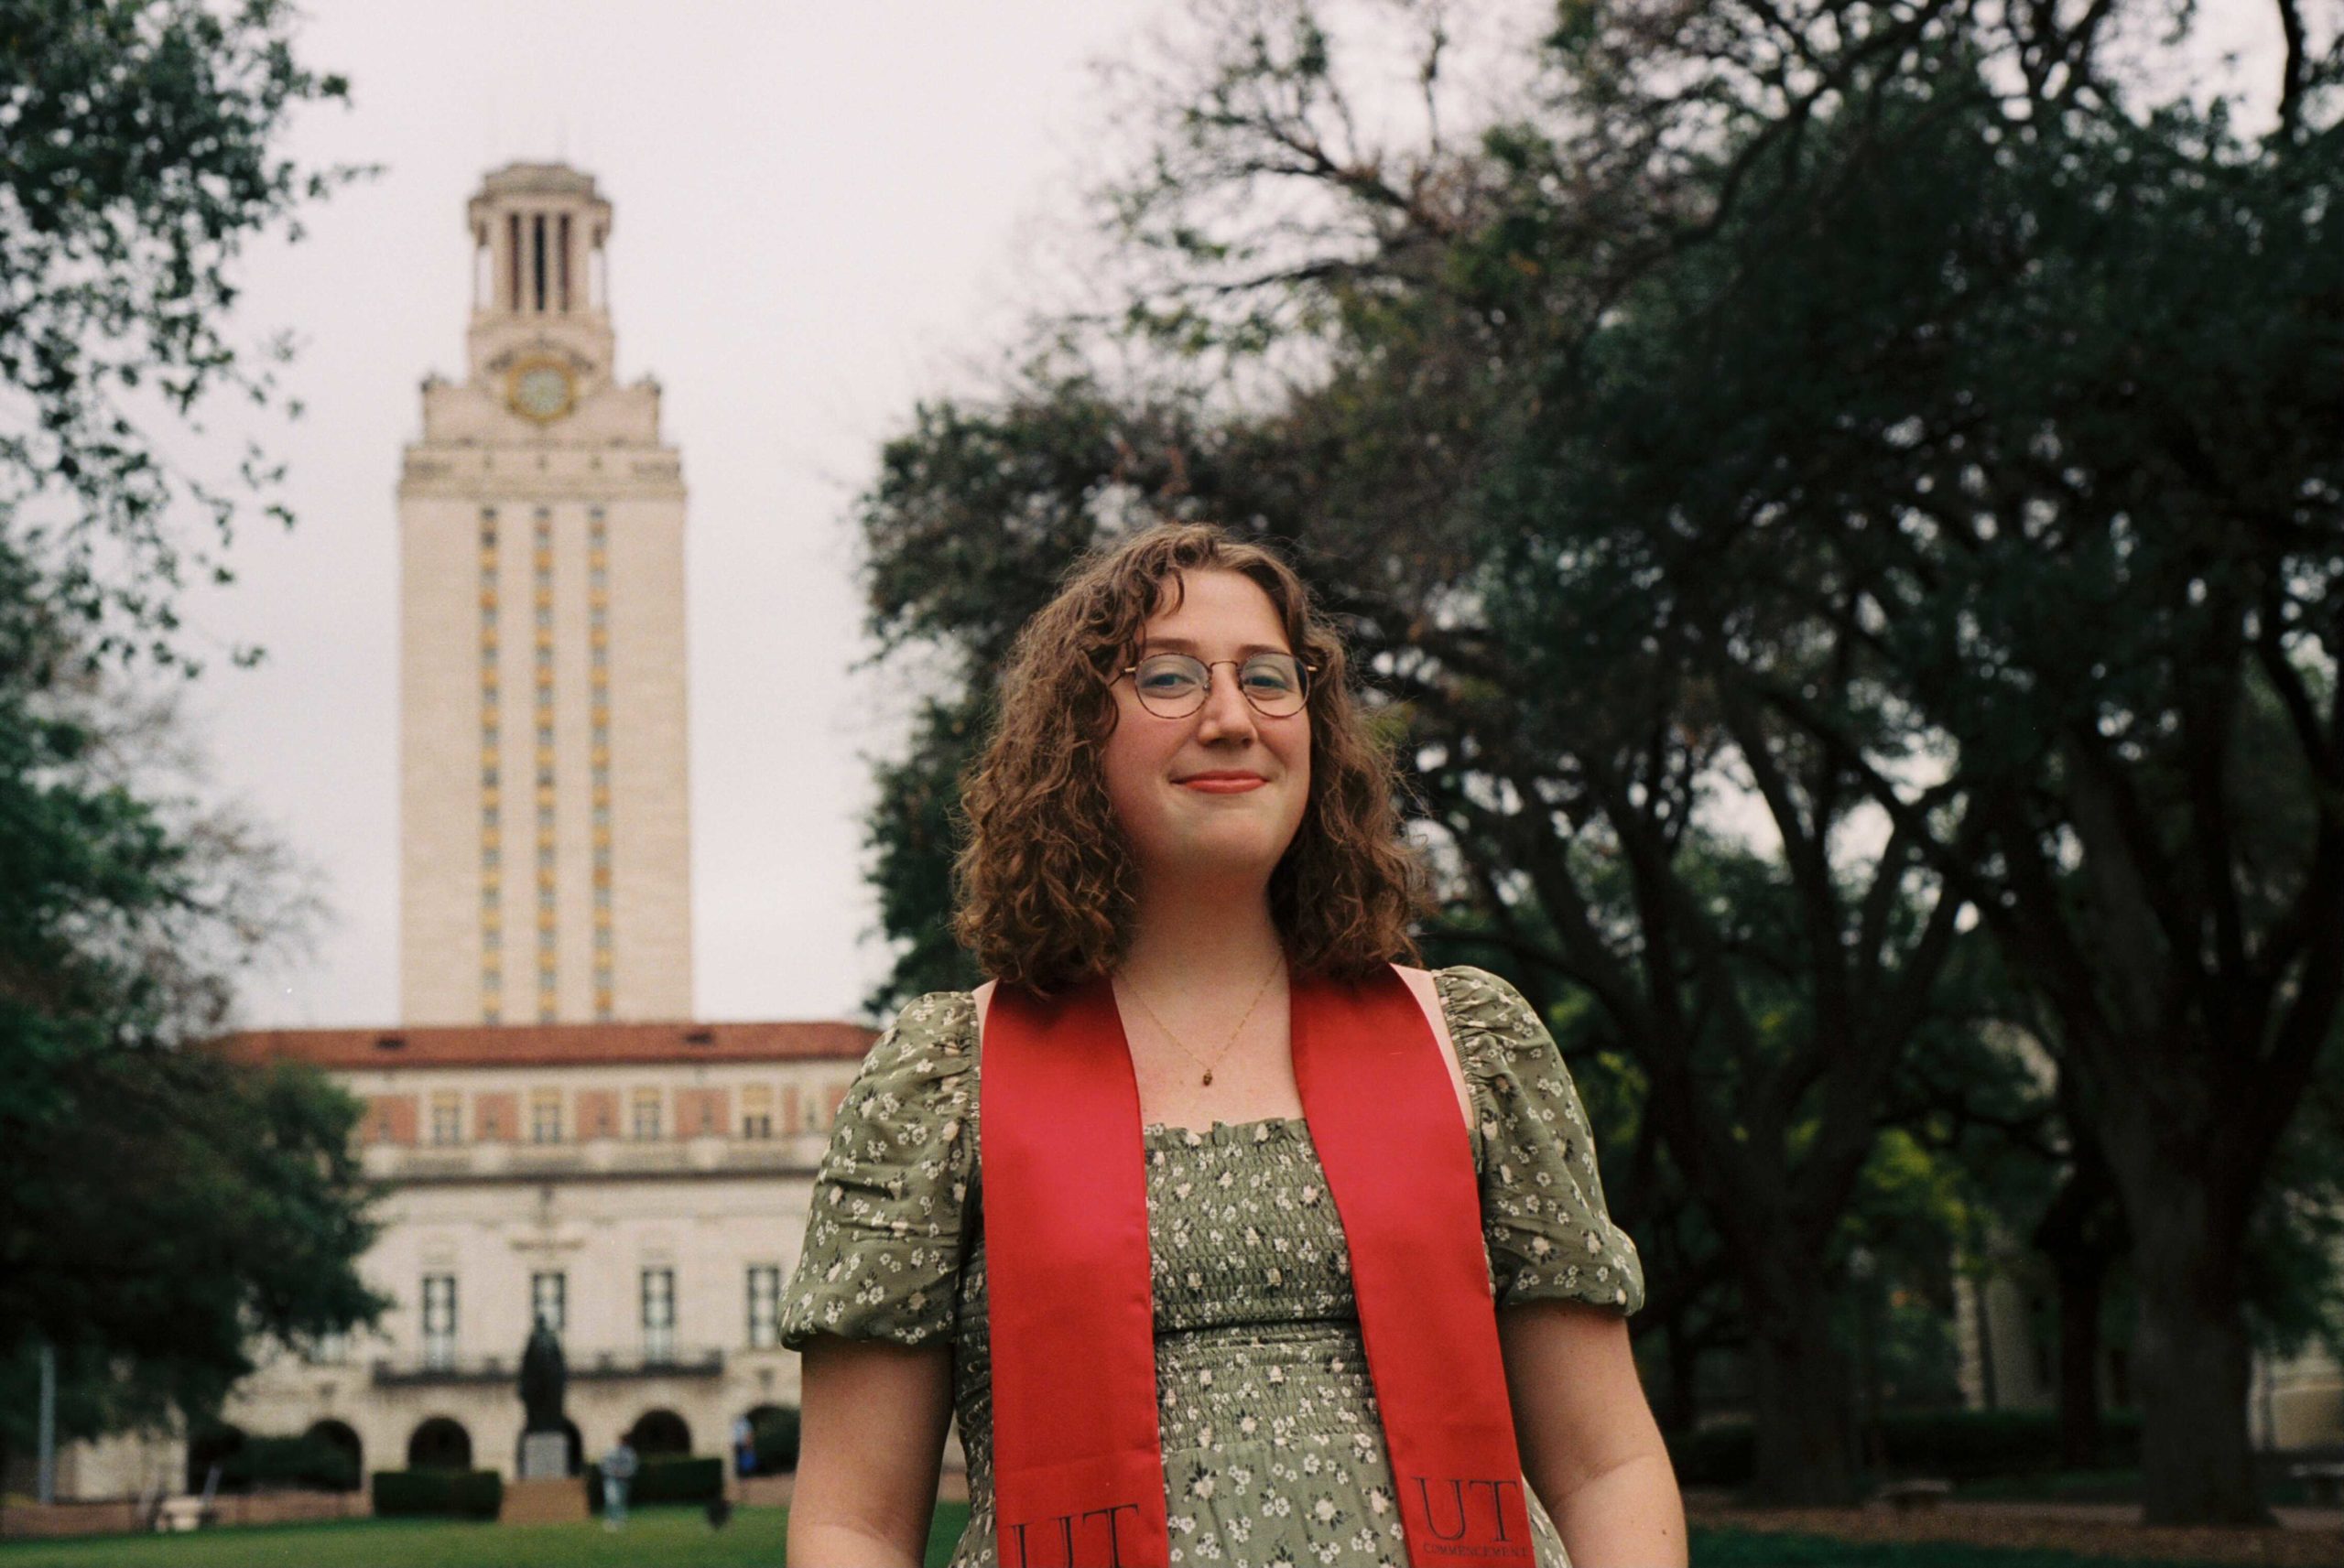 Sara Schleede poses in Main Mall in front of UT Tower